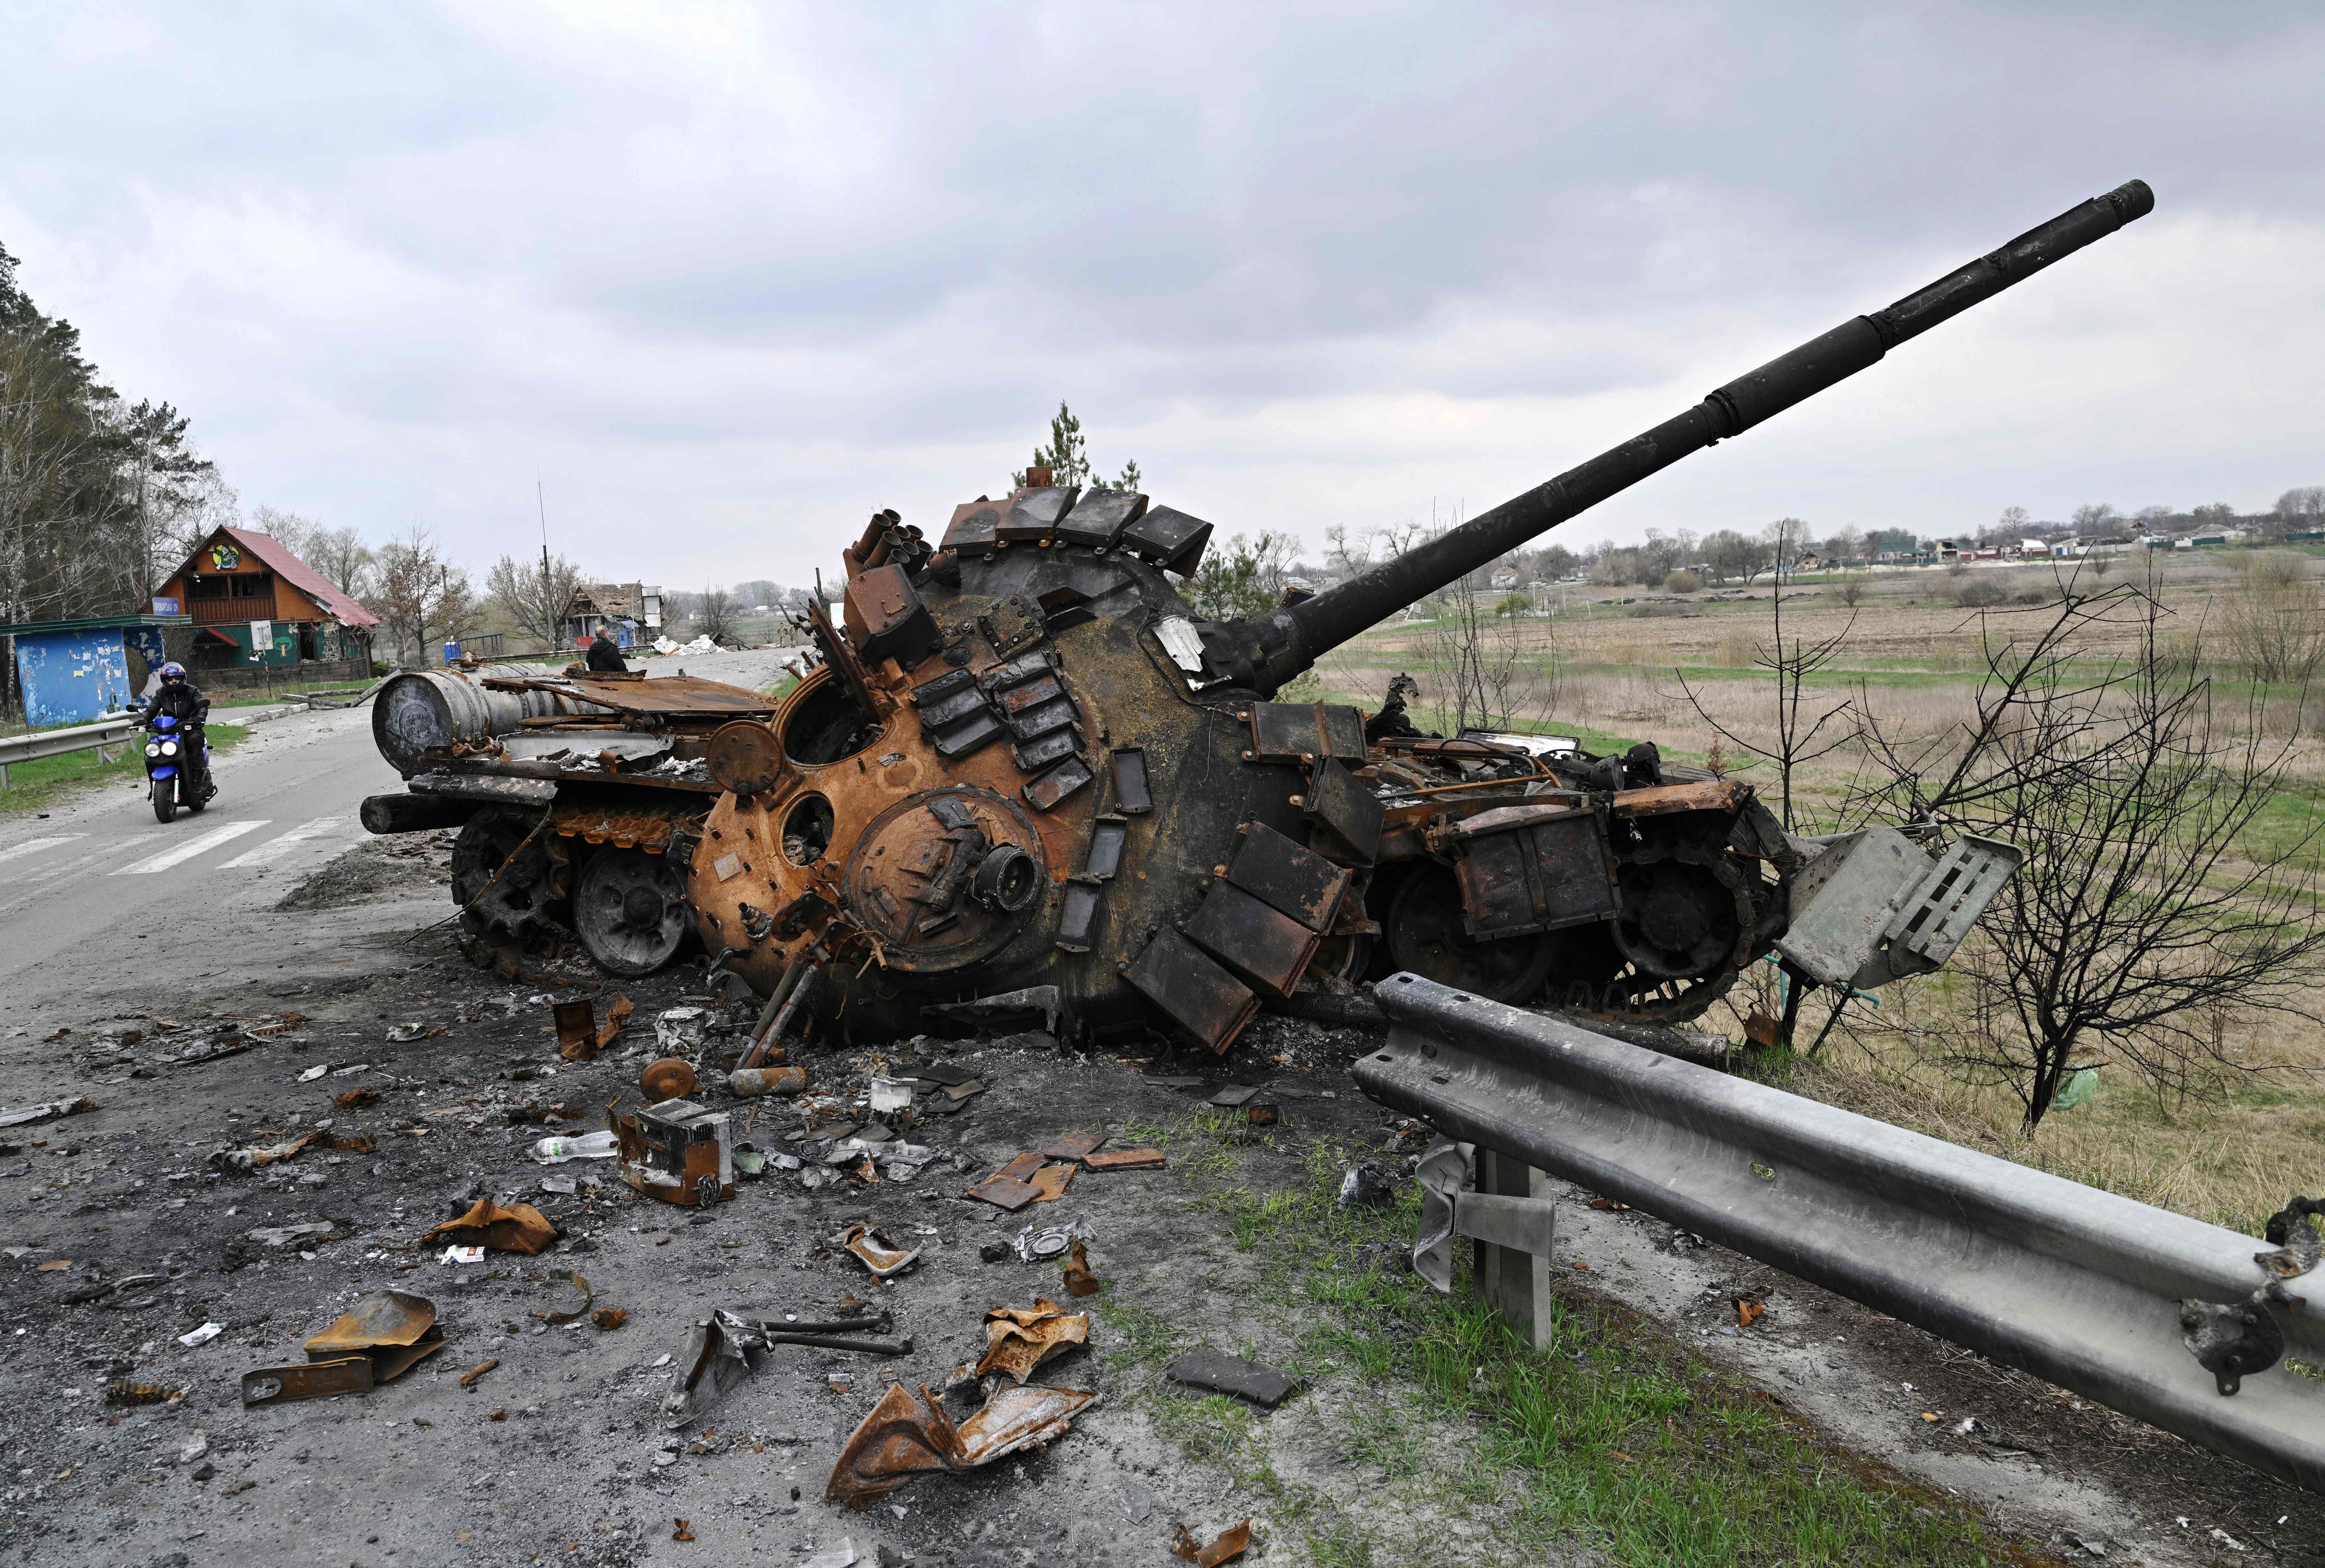 A man ride a motorbike past a destroyed Russian tank on a road in the village of Rusaniv, in the Kyiv region on April 16, 2022. - Many of the nearly five million people who have fled Ukraine will not have homes to return to, the United Nations said on April 16, 2022, as another 40,000 fled the country in 24 hours. (Photo by Genya SAVILOV / AFP) (Photo by GENYA SAVILOV/AFP via Getty Images)